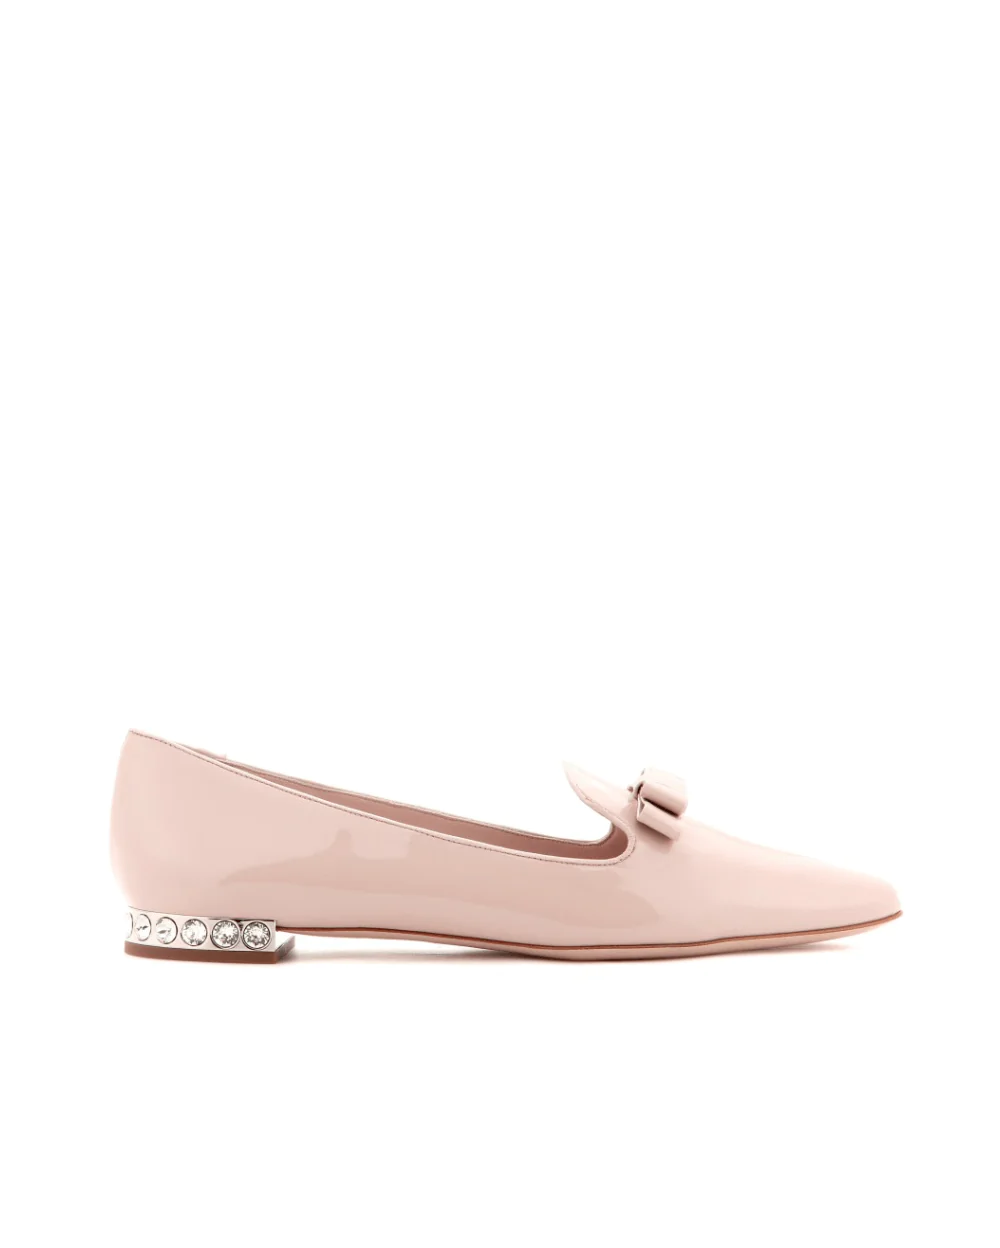 Miu Miu Patent Leather Slippers With Crystal-embellished Heel